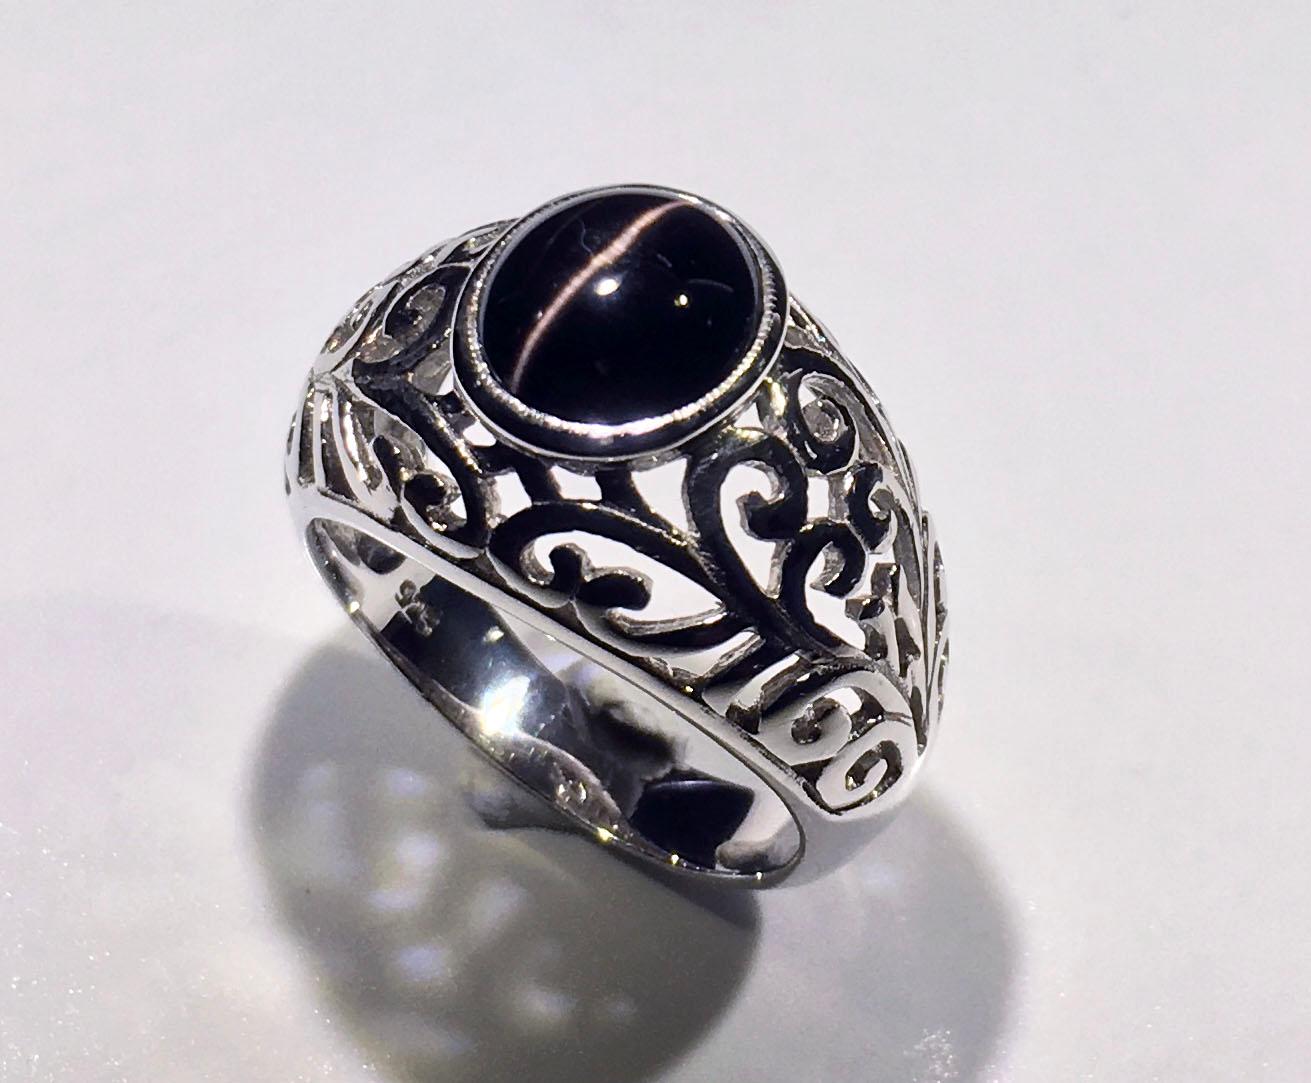 Kary Adam Designed, Cats Eye Cabochon Sillimanite Silver Ring. This Silver ring is a Size 8 USA and has a Weight of 6.8 Grams. The Cabochon Sillimanite is 3.7 Carats and is Satisfying Mysterious Dark Black with a Vivid White Chatoyant Cats Eye.